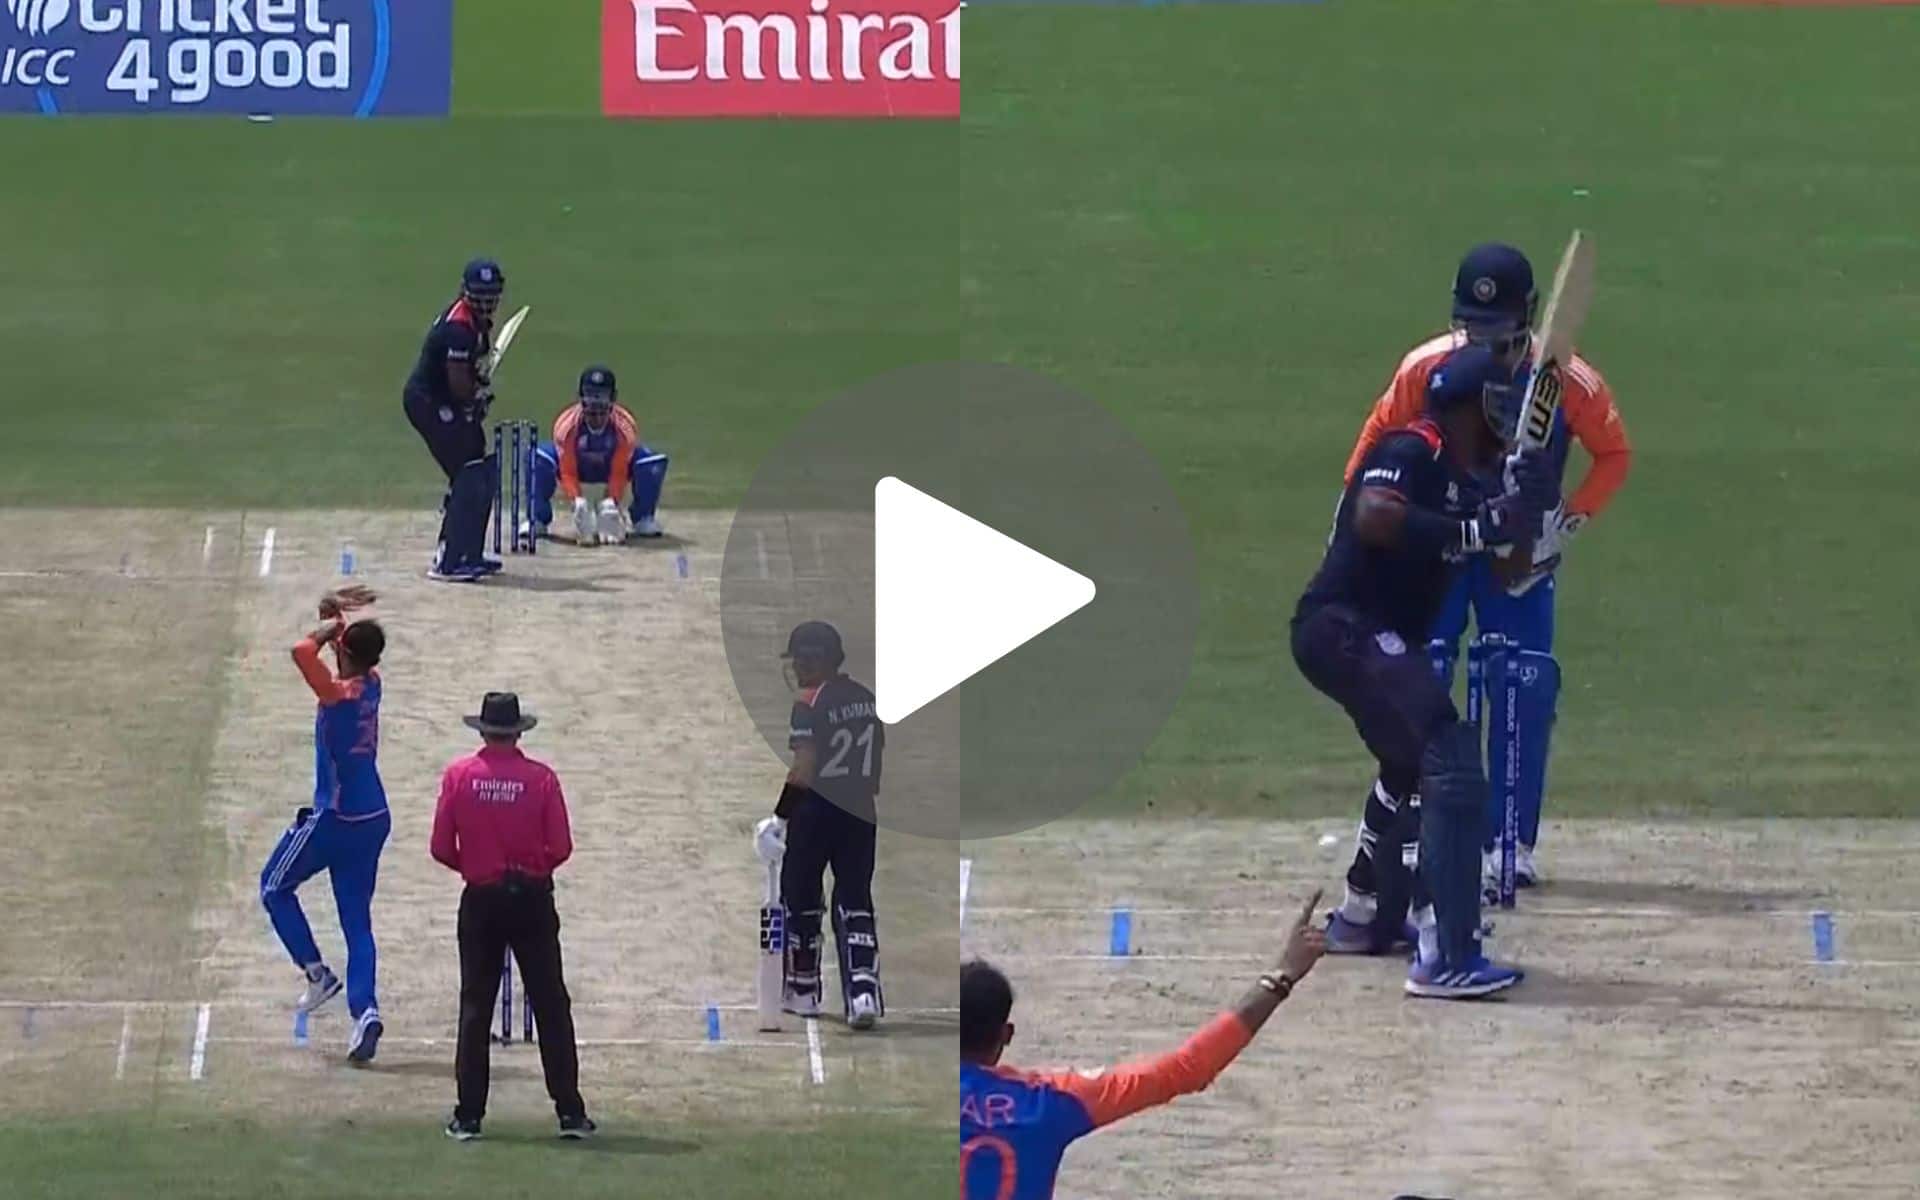 [Watch] USA's Taylor Attempts To 'Break The Wickets With Bat' After Axar Patel Cleans Him Up